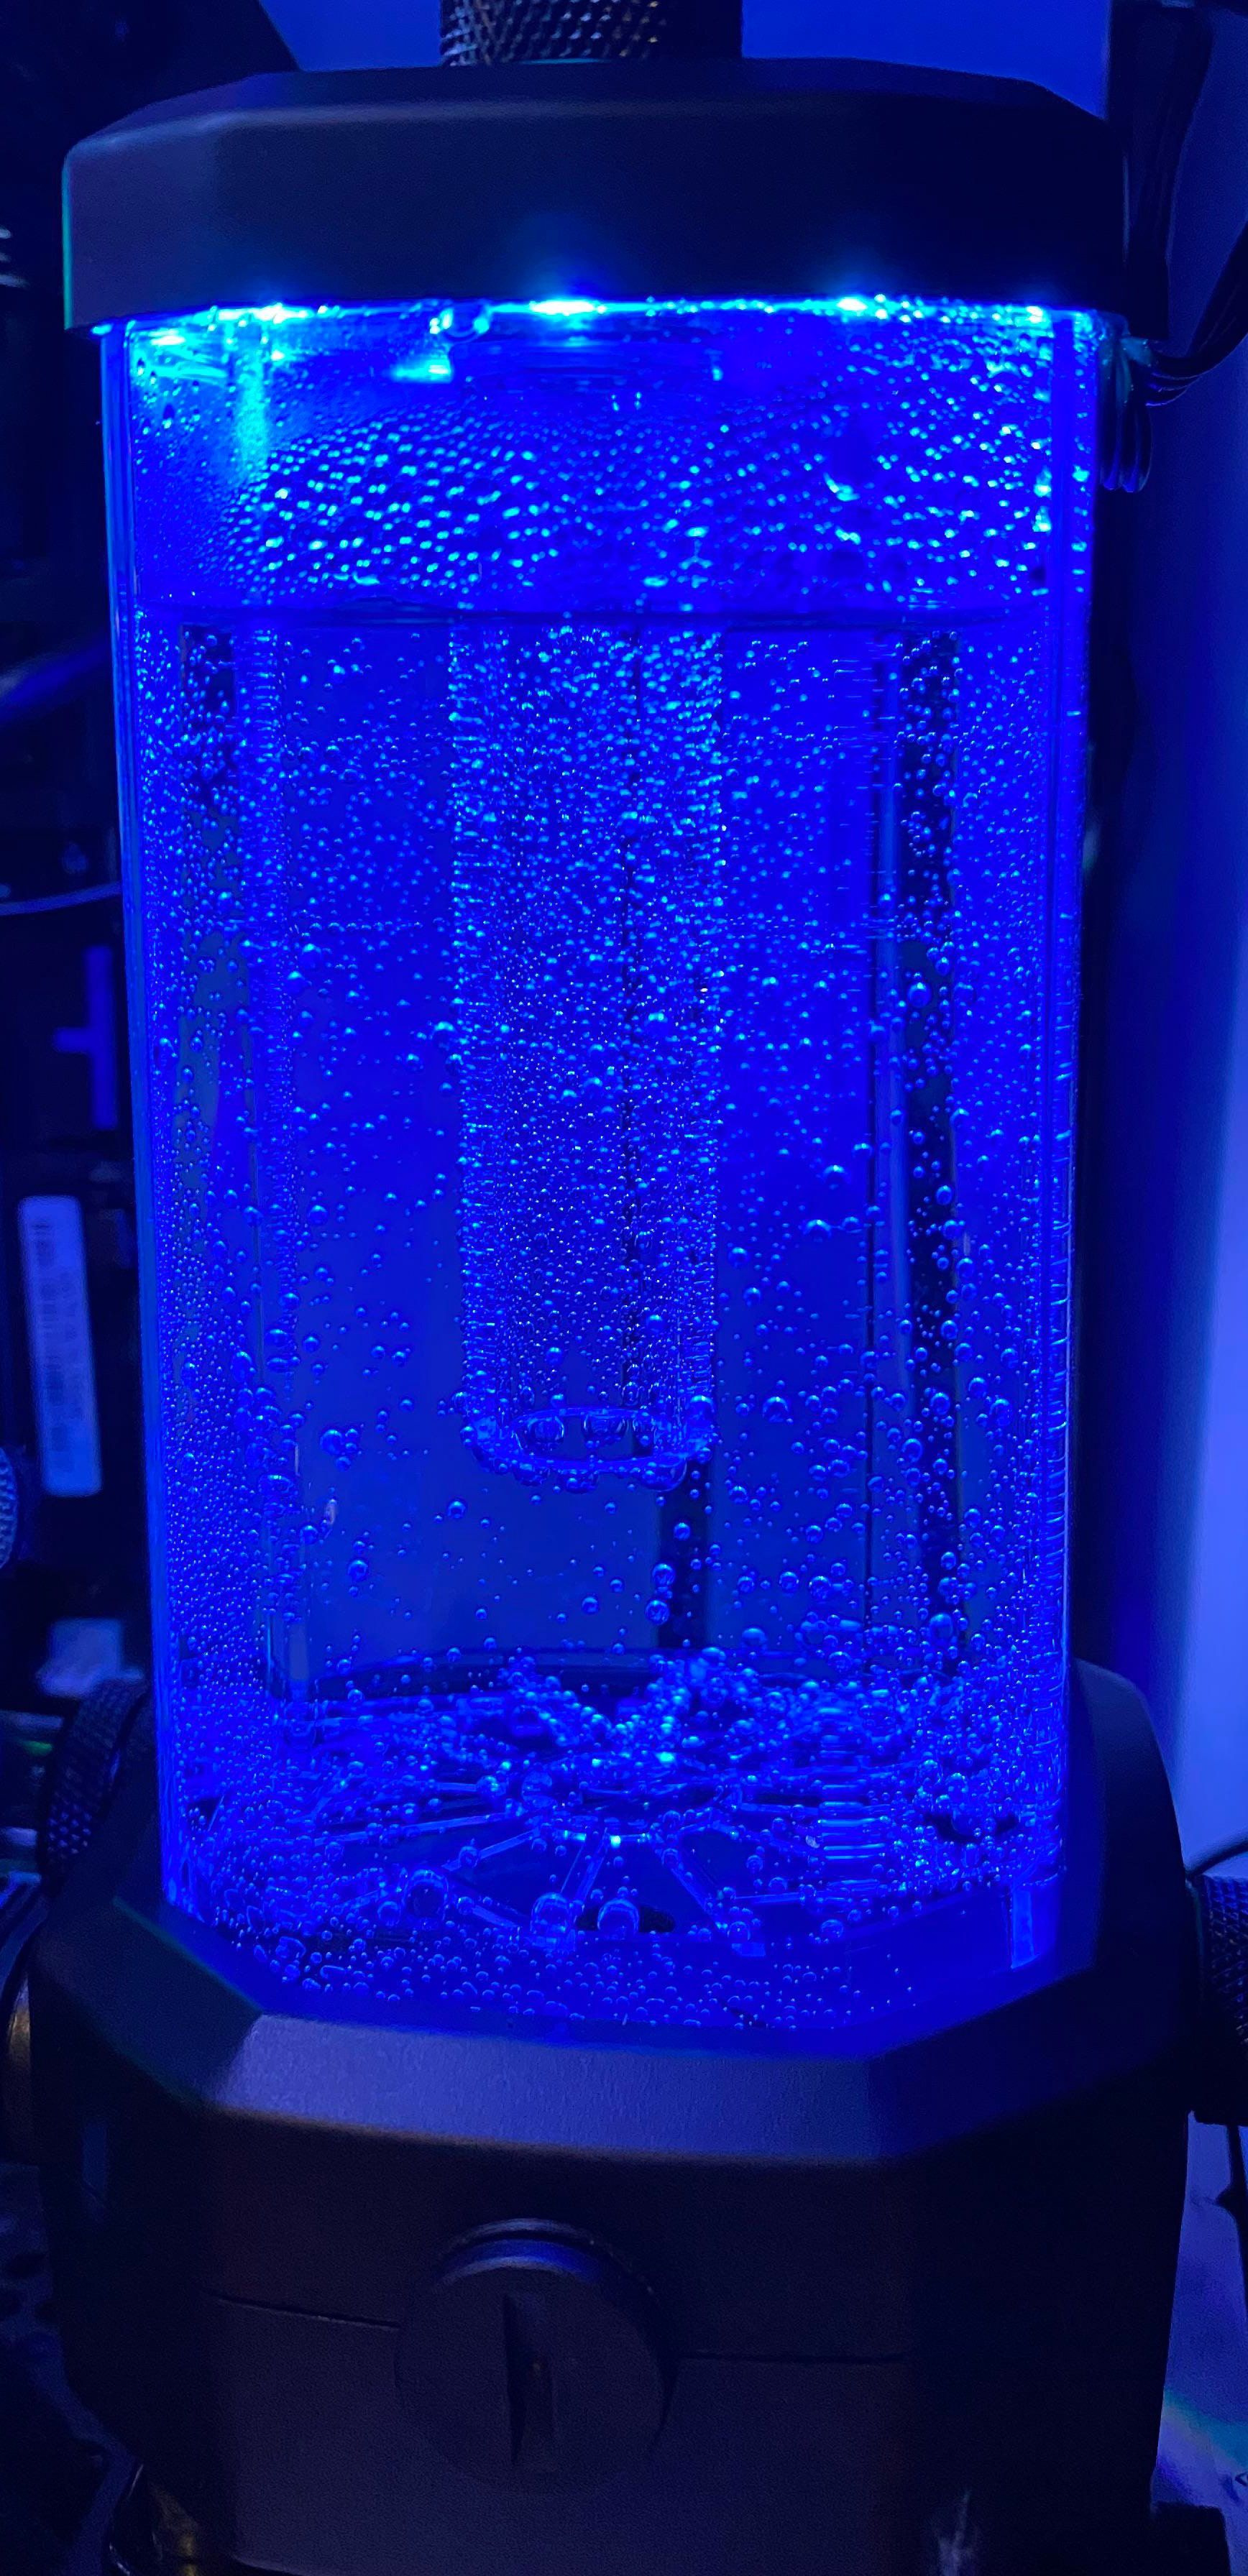 Bubbles in a custom water cooled PC reservoir